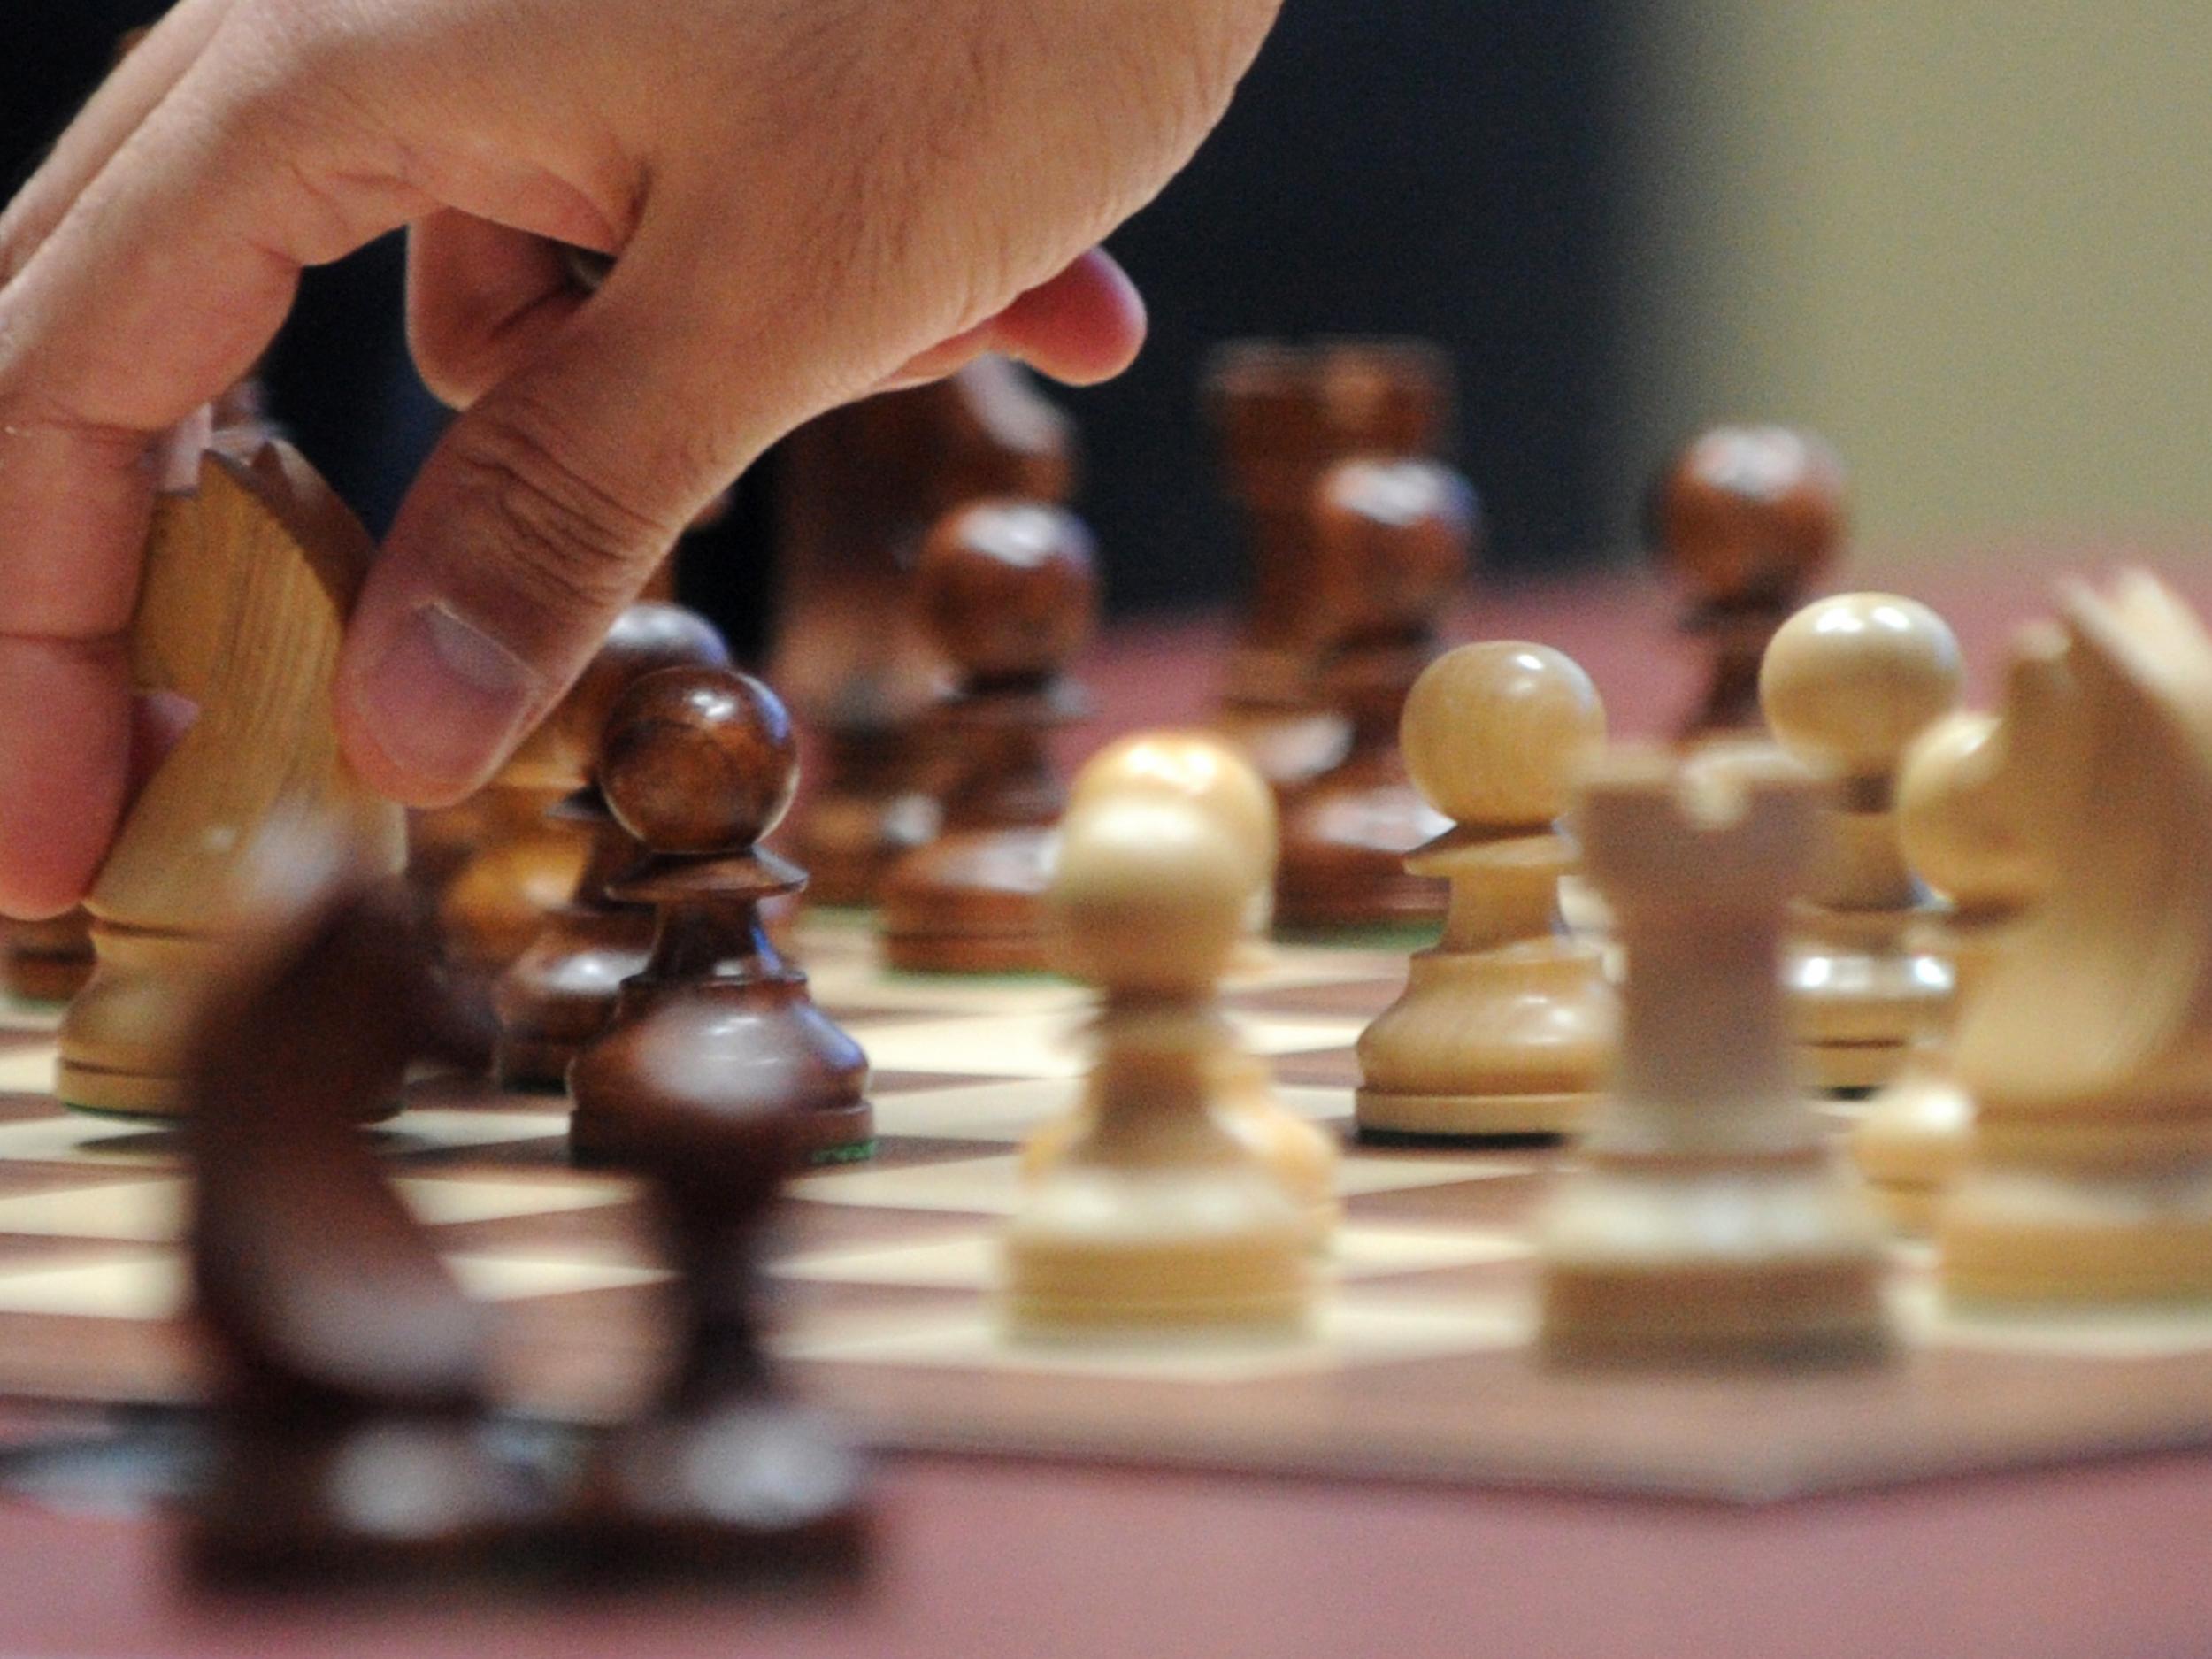 There has been a furious power struggle at the top of chess